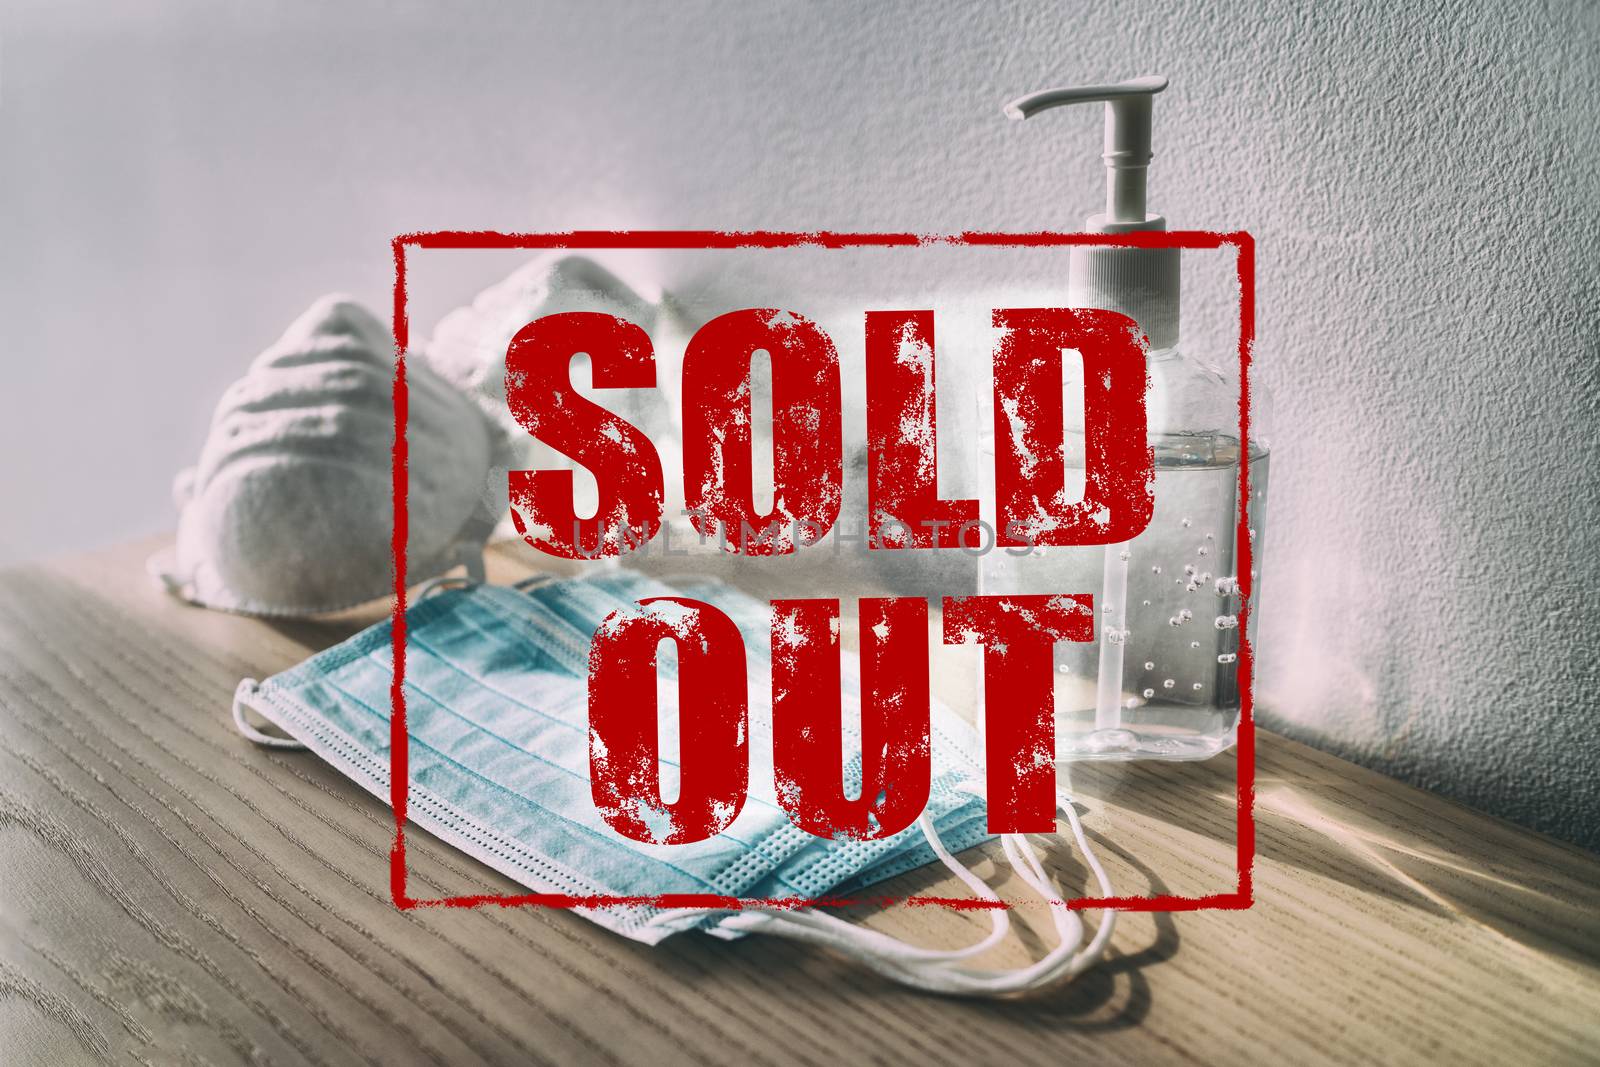 COVID-19 SOLD OUT red text SIGN of medical supplies at store. Coronavirus panic buying shortage of sanitizing products hand sanitizer gel bottles, masks, healthcare supply stockpiling problem by Maridav